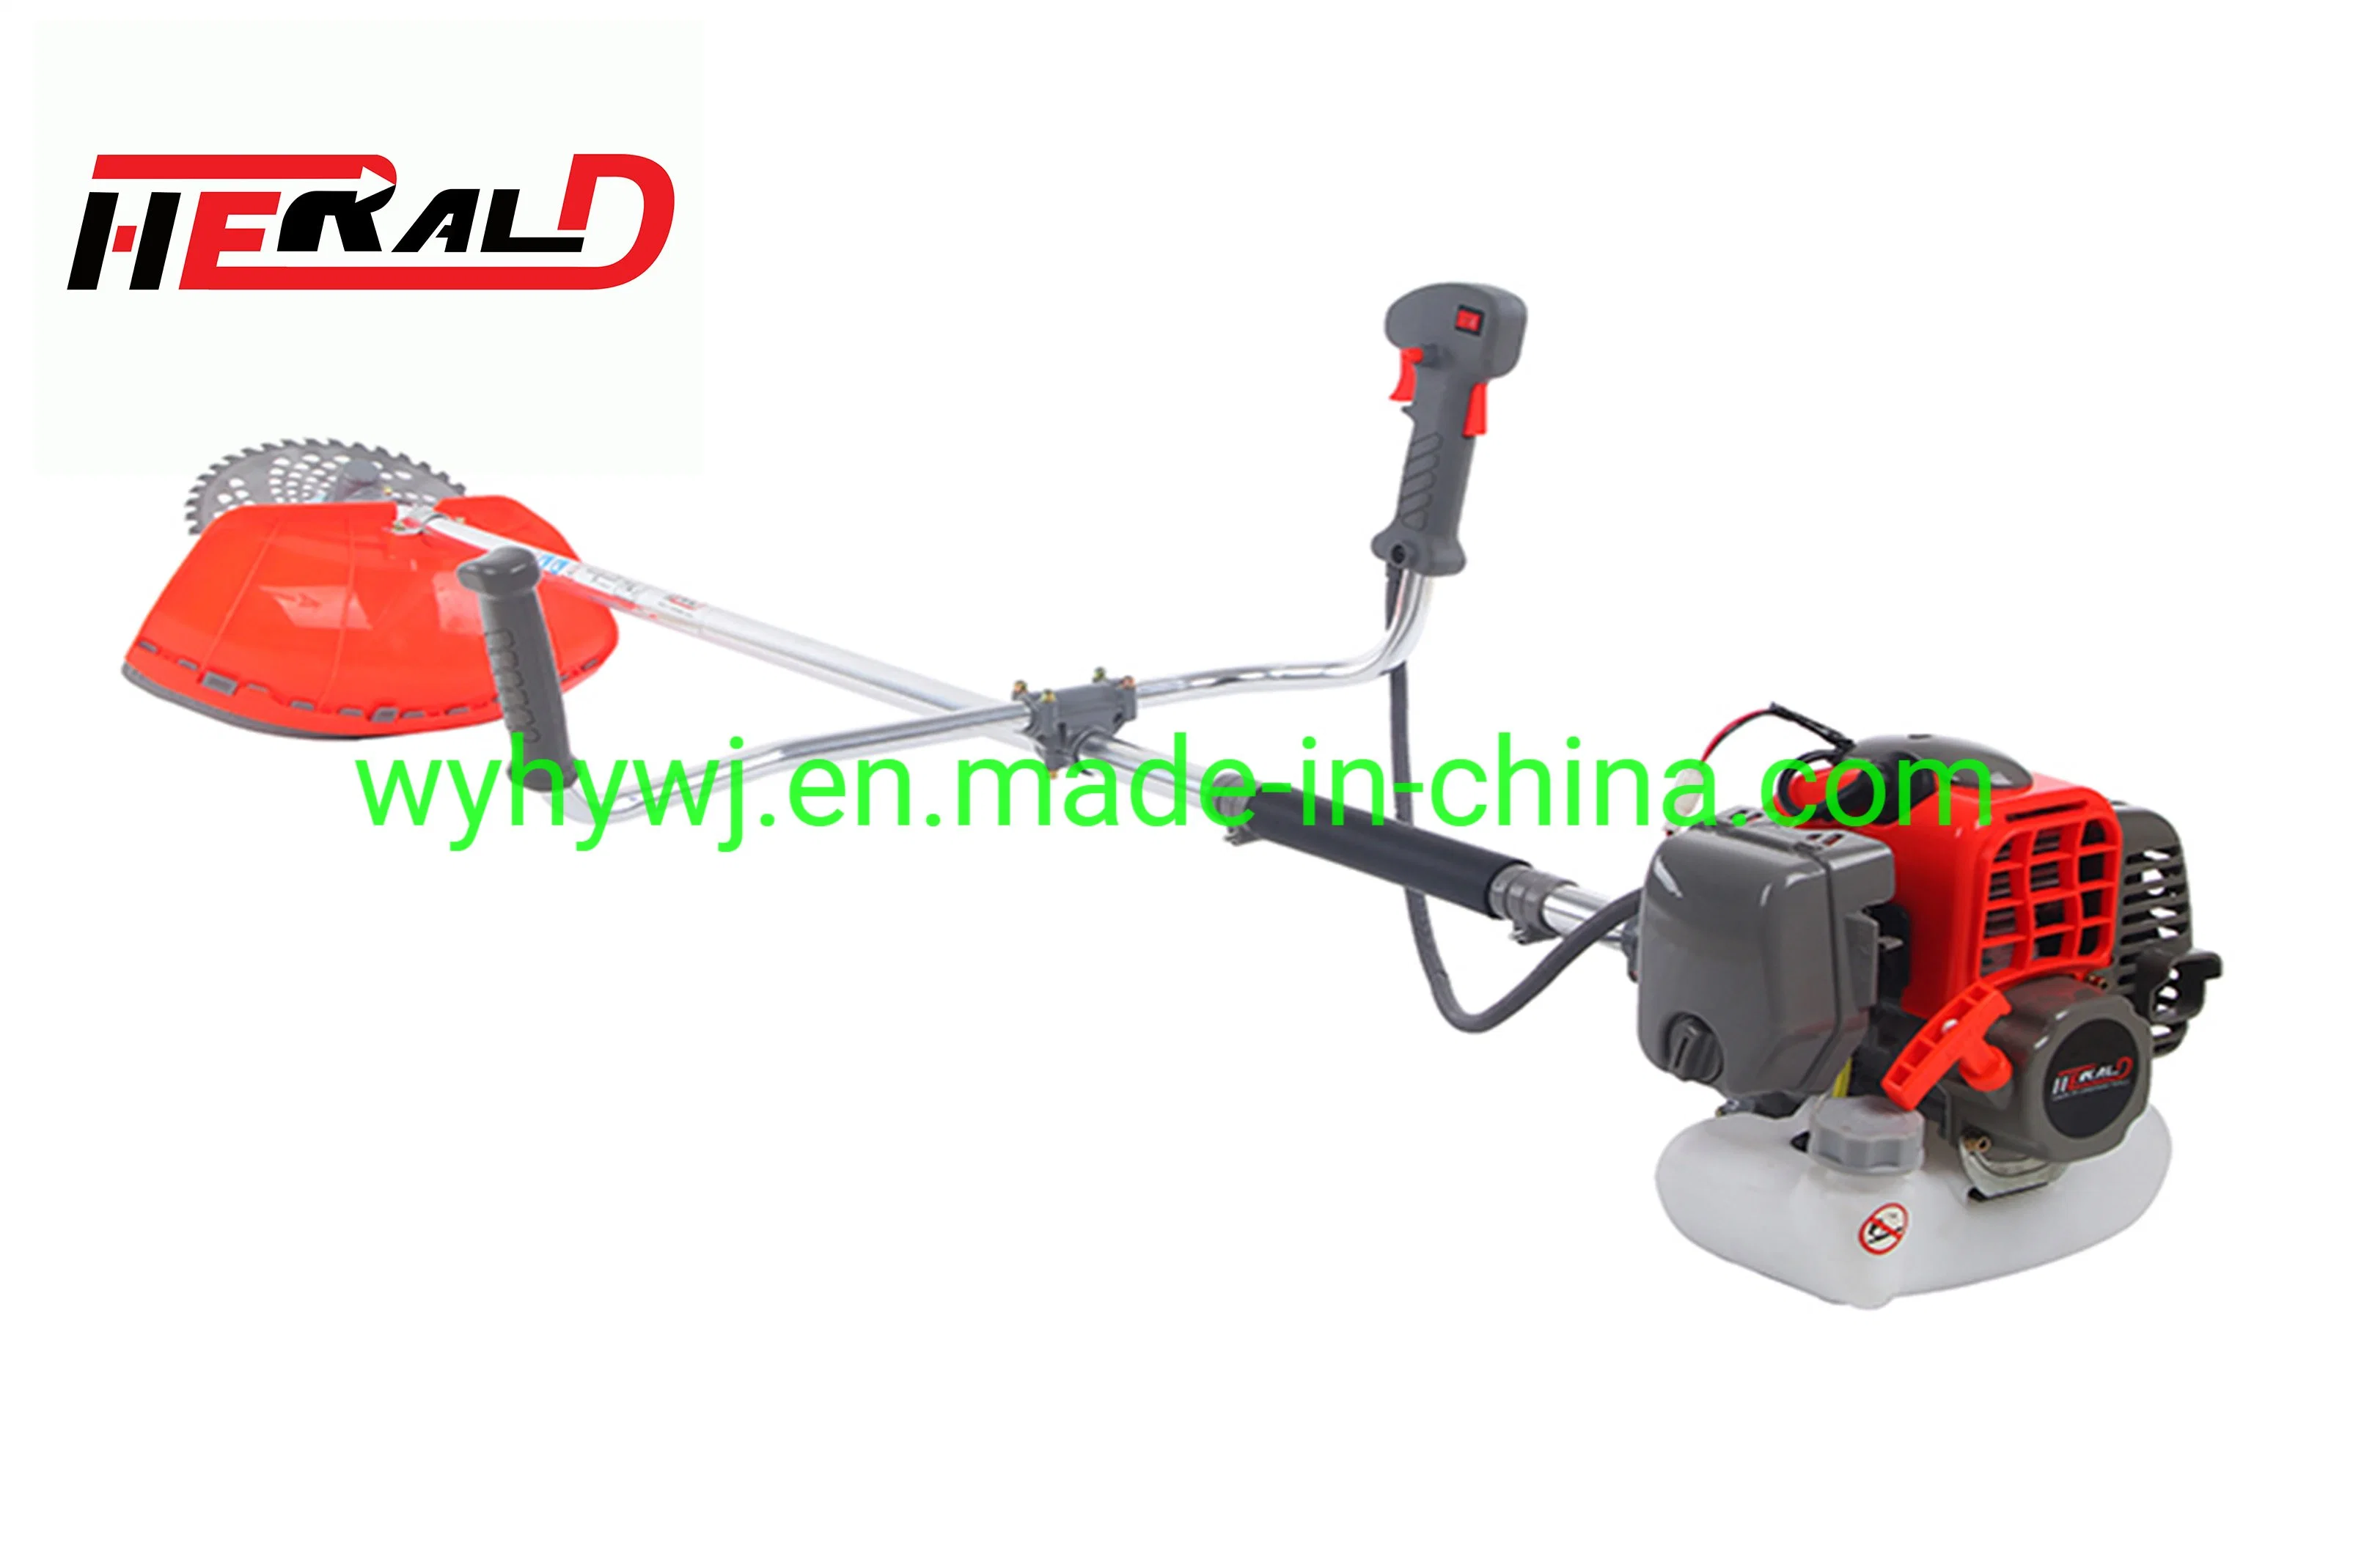 Low Price Well Equiped 52cc Gasoline Brush Cutter Hy-415CT Popular Grass Trimmer